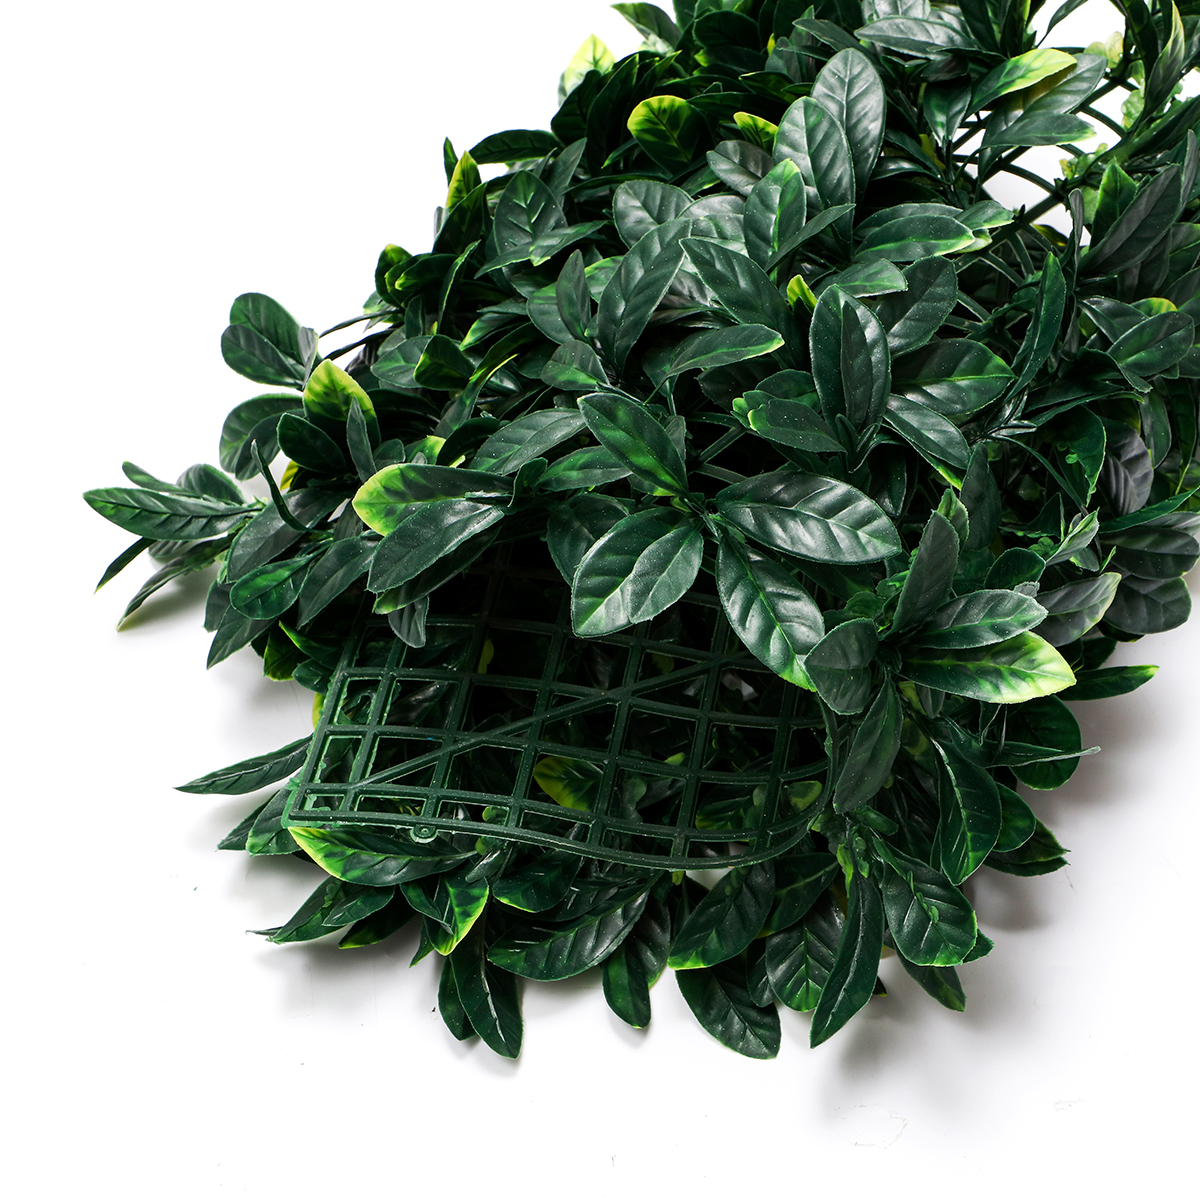 4060CM-Artificial-Topiary-Hedges-Panels-Plastic-Faux-Shrubs-Fence-Mat-Greenery-Wall-Backdrop-Decor-G-1729461-28